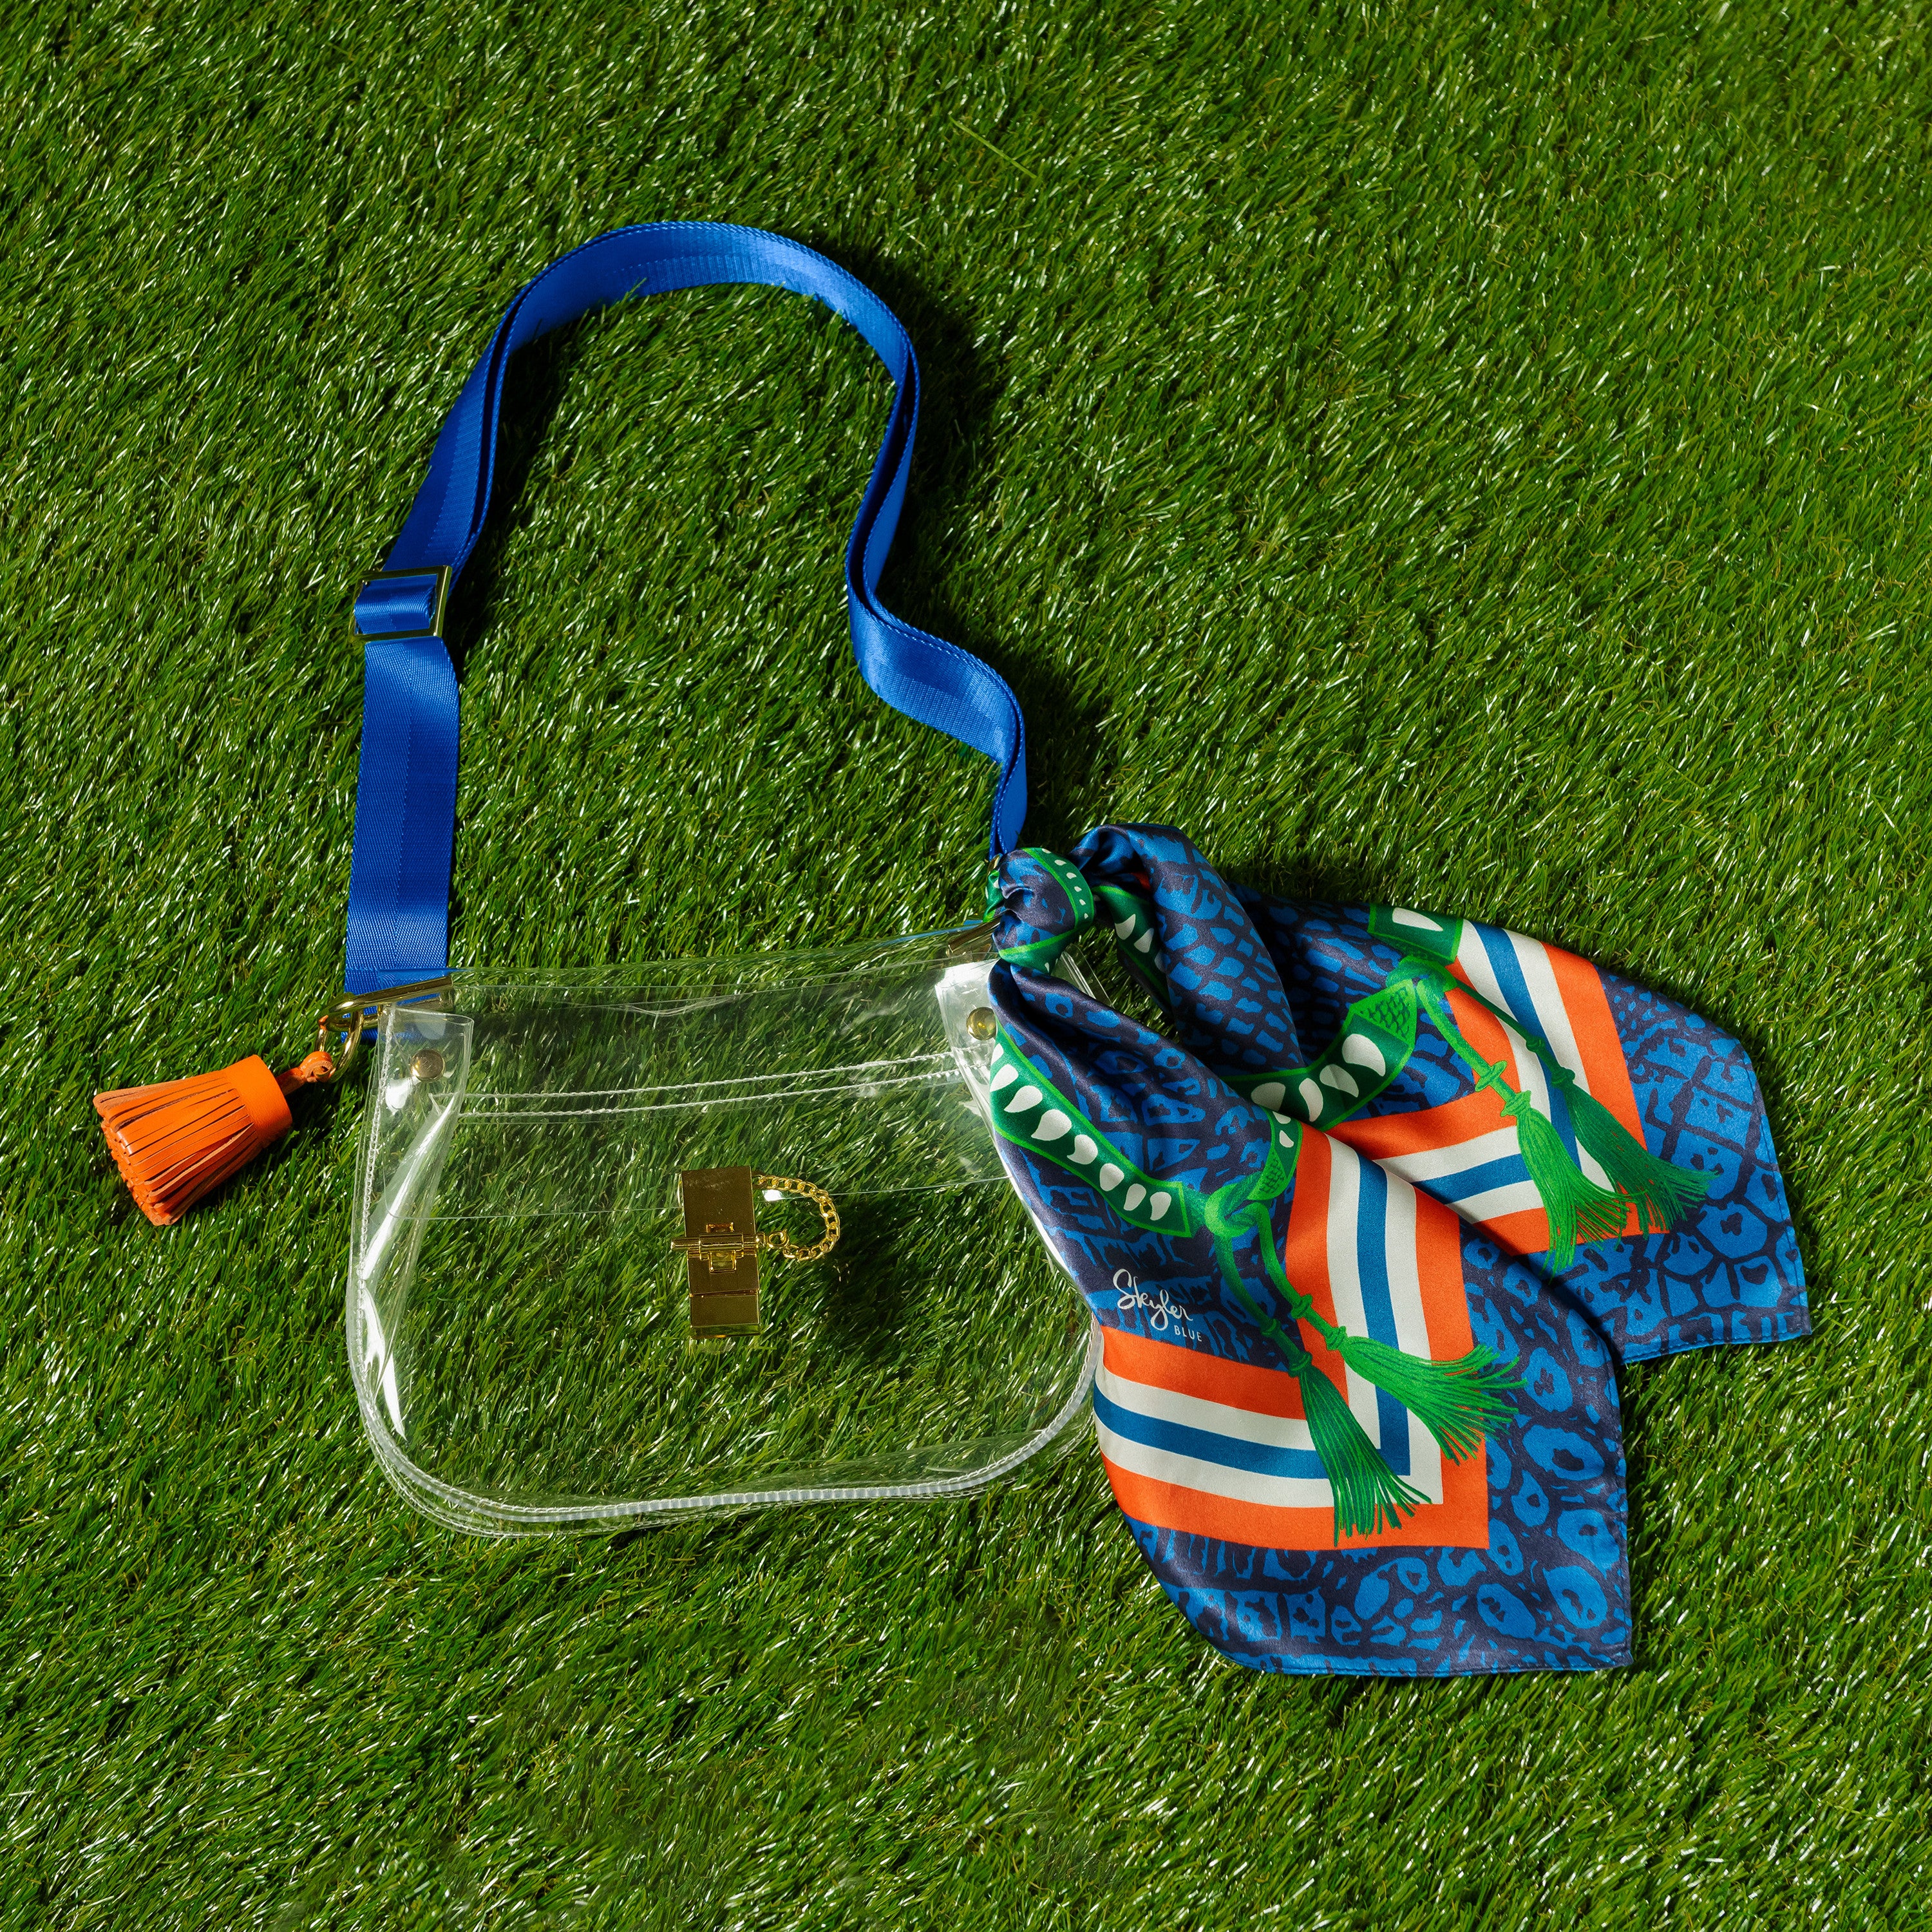 Skyler Blue’s The Gainesville Medium Saddle Clear Bag stadium approved clear bag / clear purse including adjustable, nylon webbing shoulder or crossbody strap with herringbone weave and gold hardware, 60-centimeter 100% silk twill scarf, and 100% genuine leather tassel. 